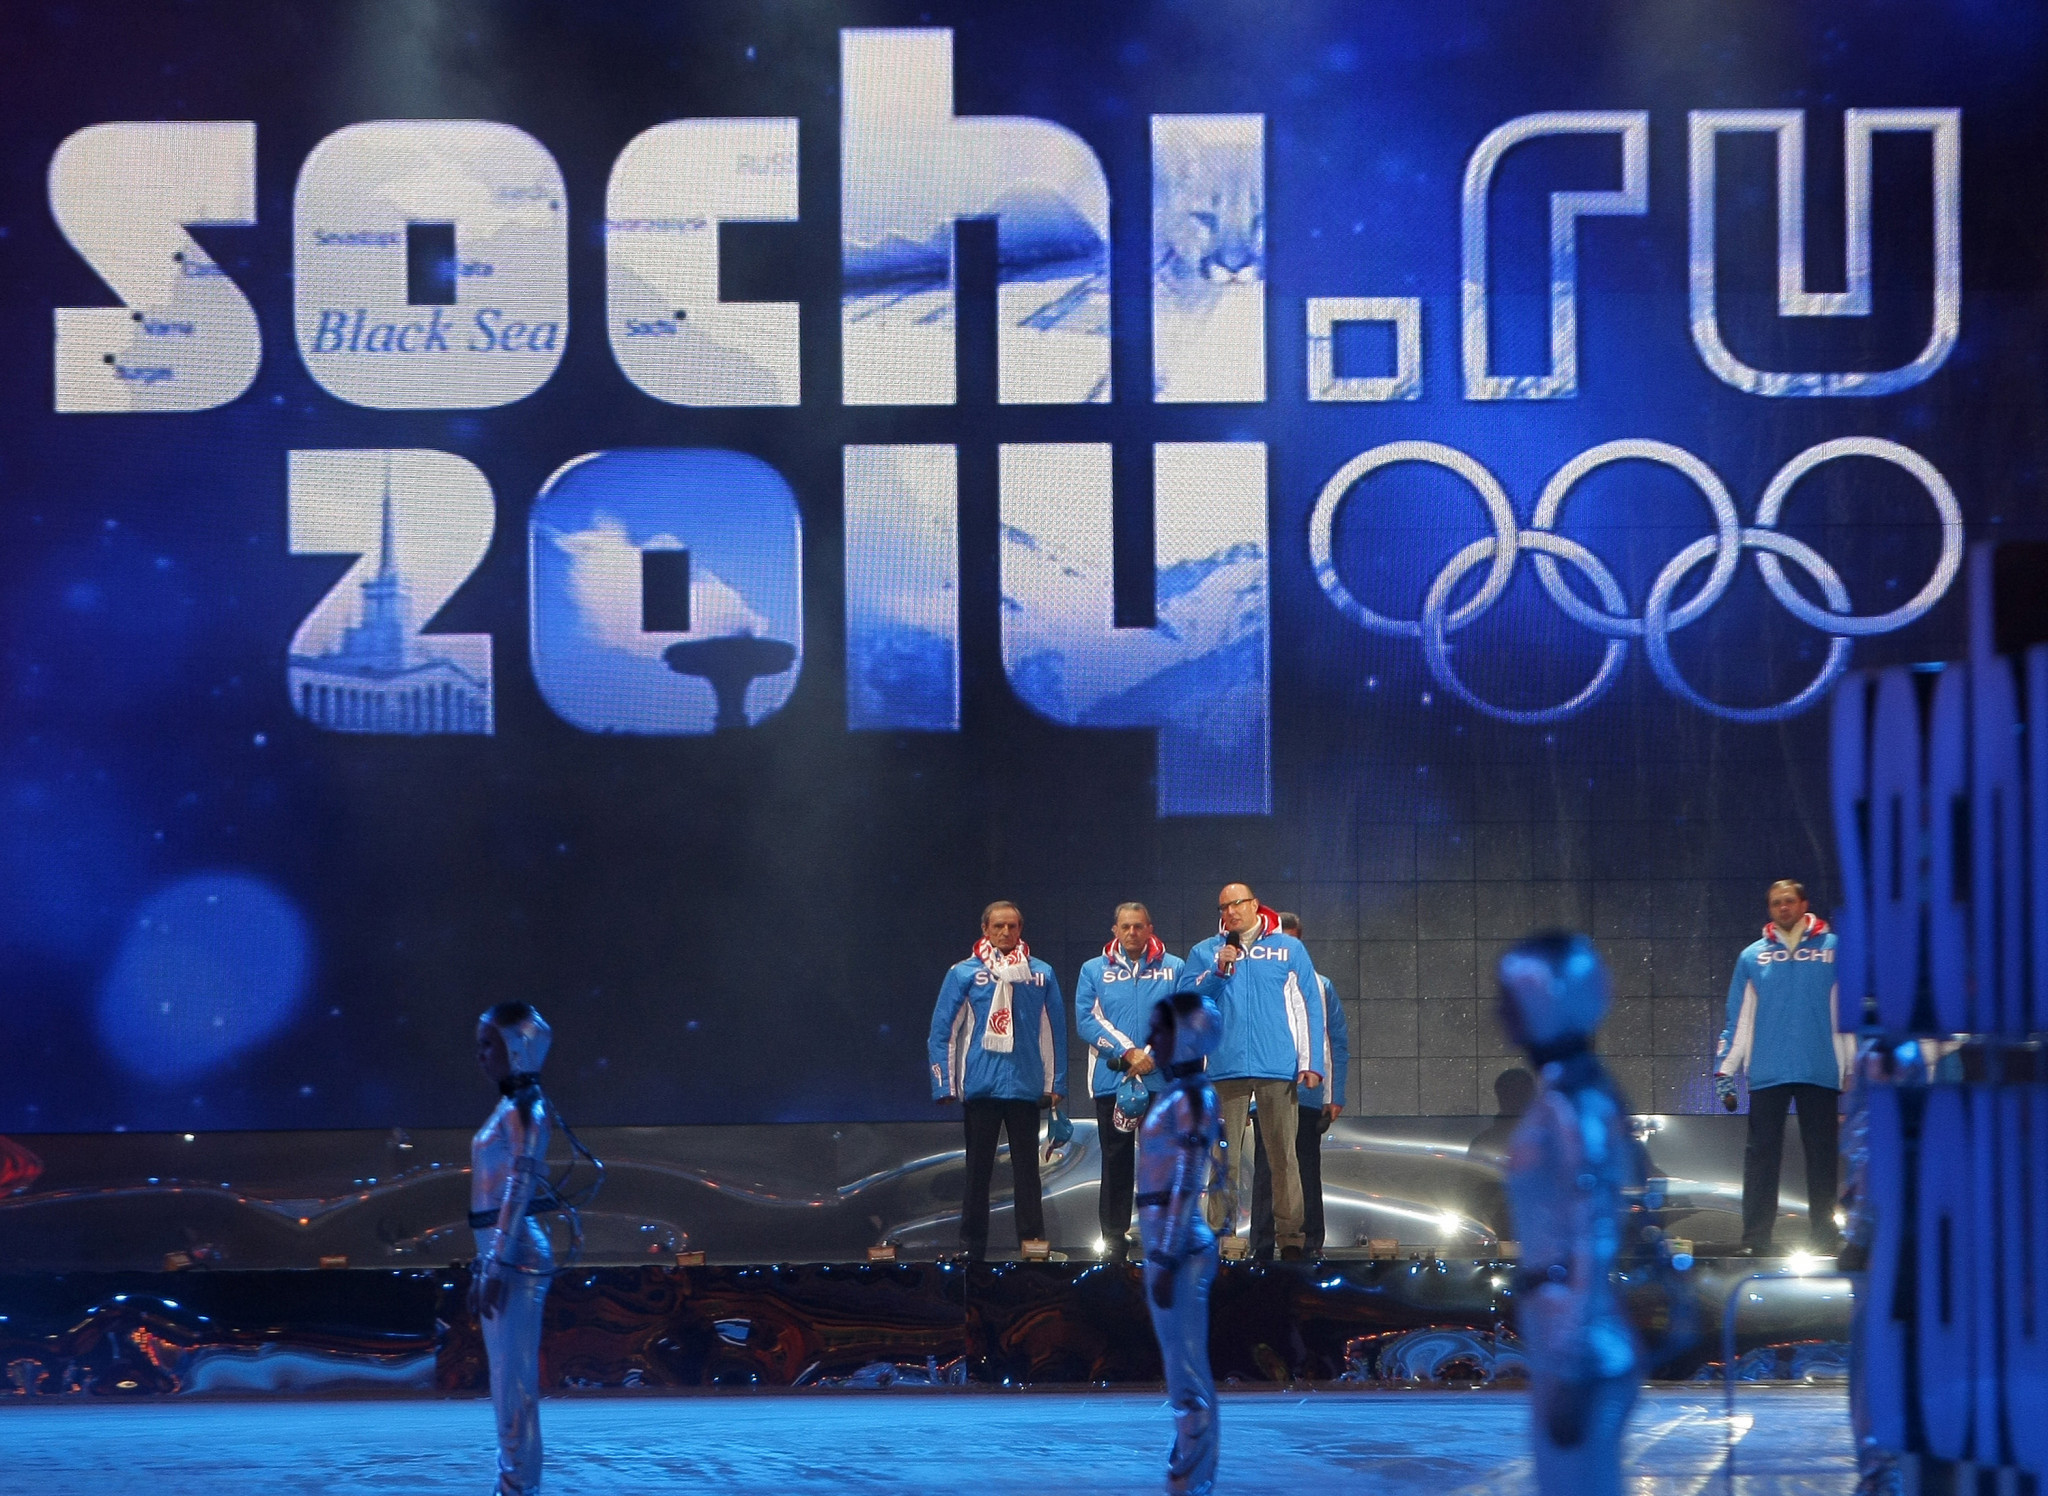 Sochi 2014 is often associated with a mammoth $51 billion pricetag ©Getty Images